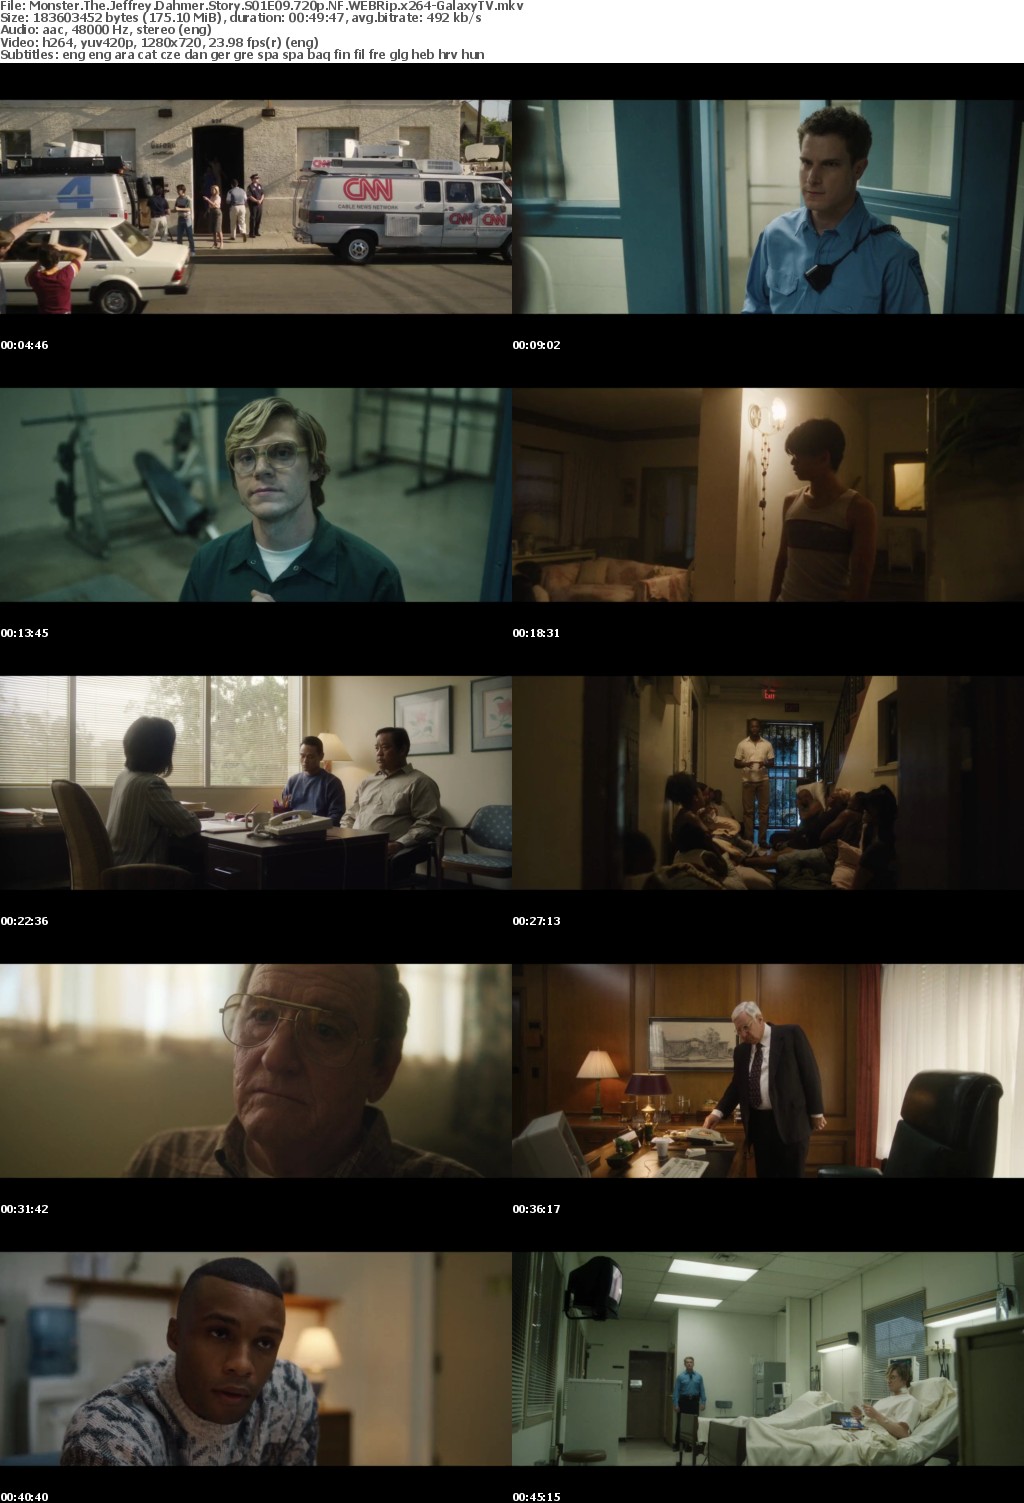 Monster The Jeffrey Dahmer Story S01 COMPLETE 720p NF WEBRip x264-GalaxyTV